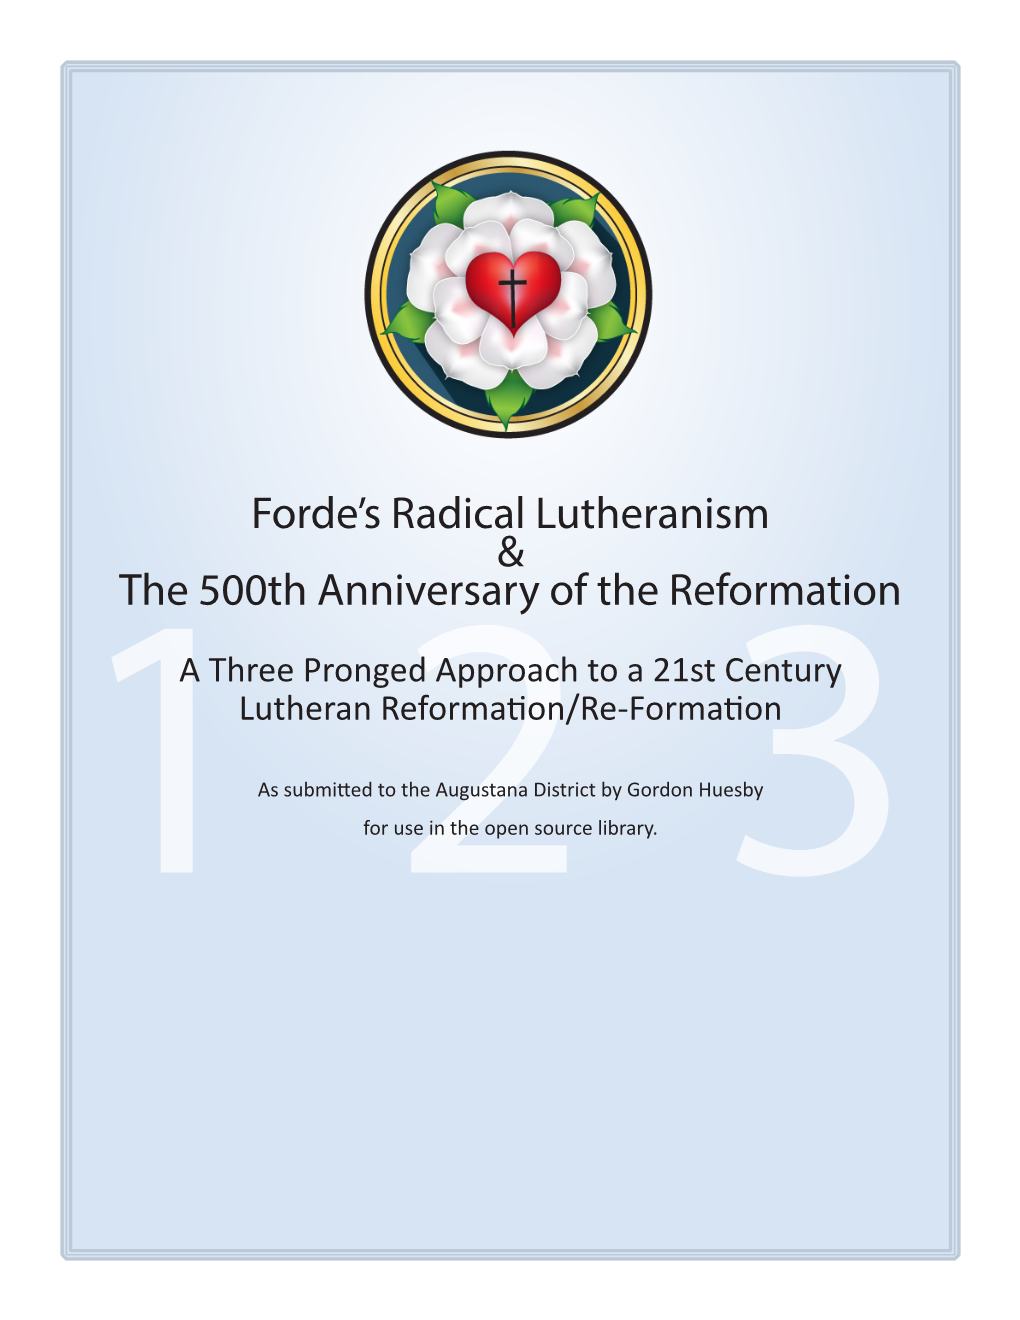 Forde's Radical Lutheranism & the 500Th Anniversary of the Reformation